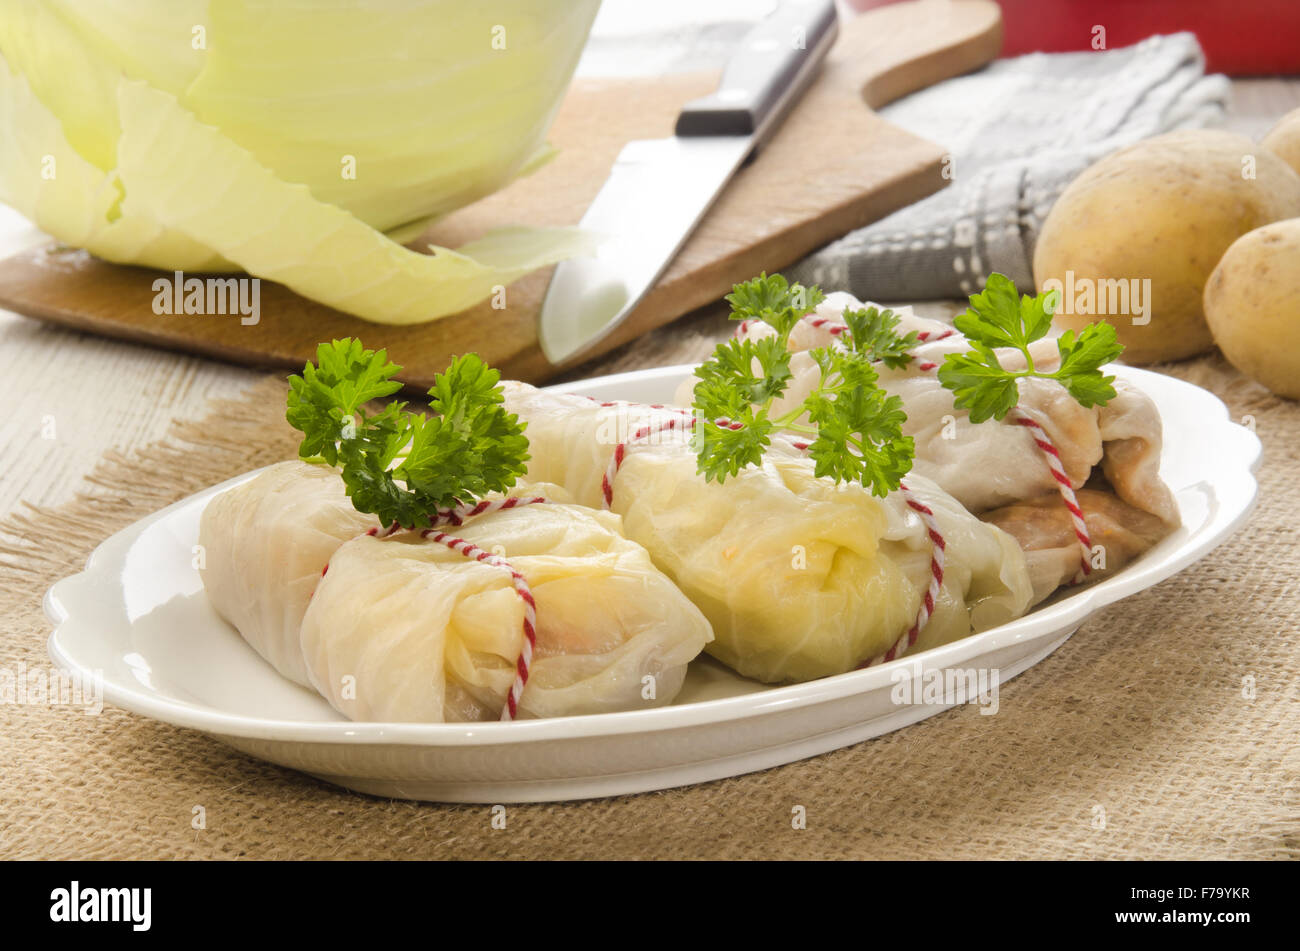 cabbage rolls filled with minced meat and rice on plate, traditional dish of many countries Stock Photo